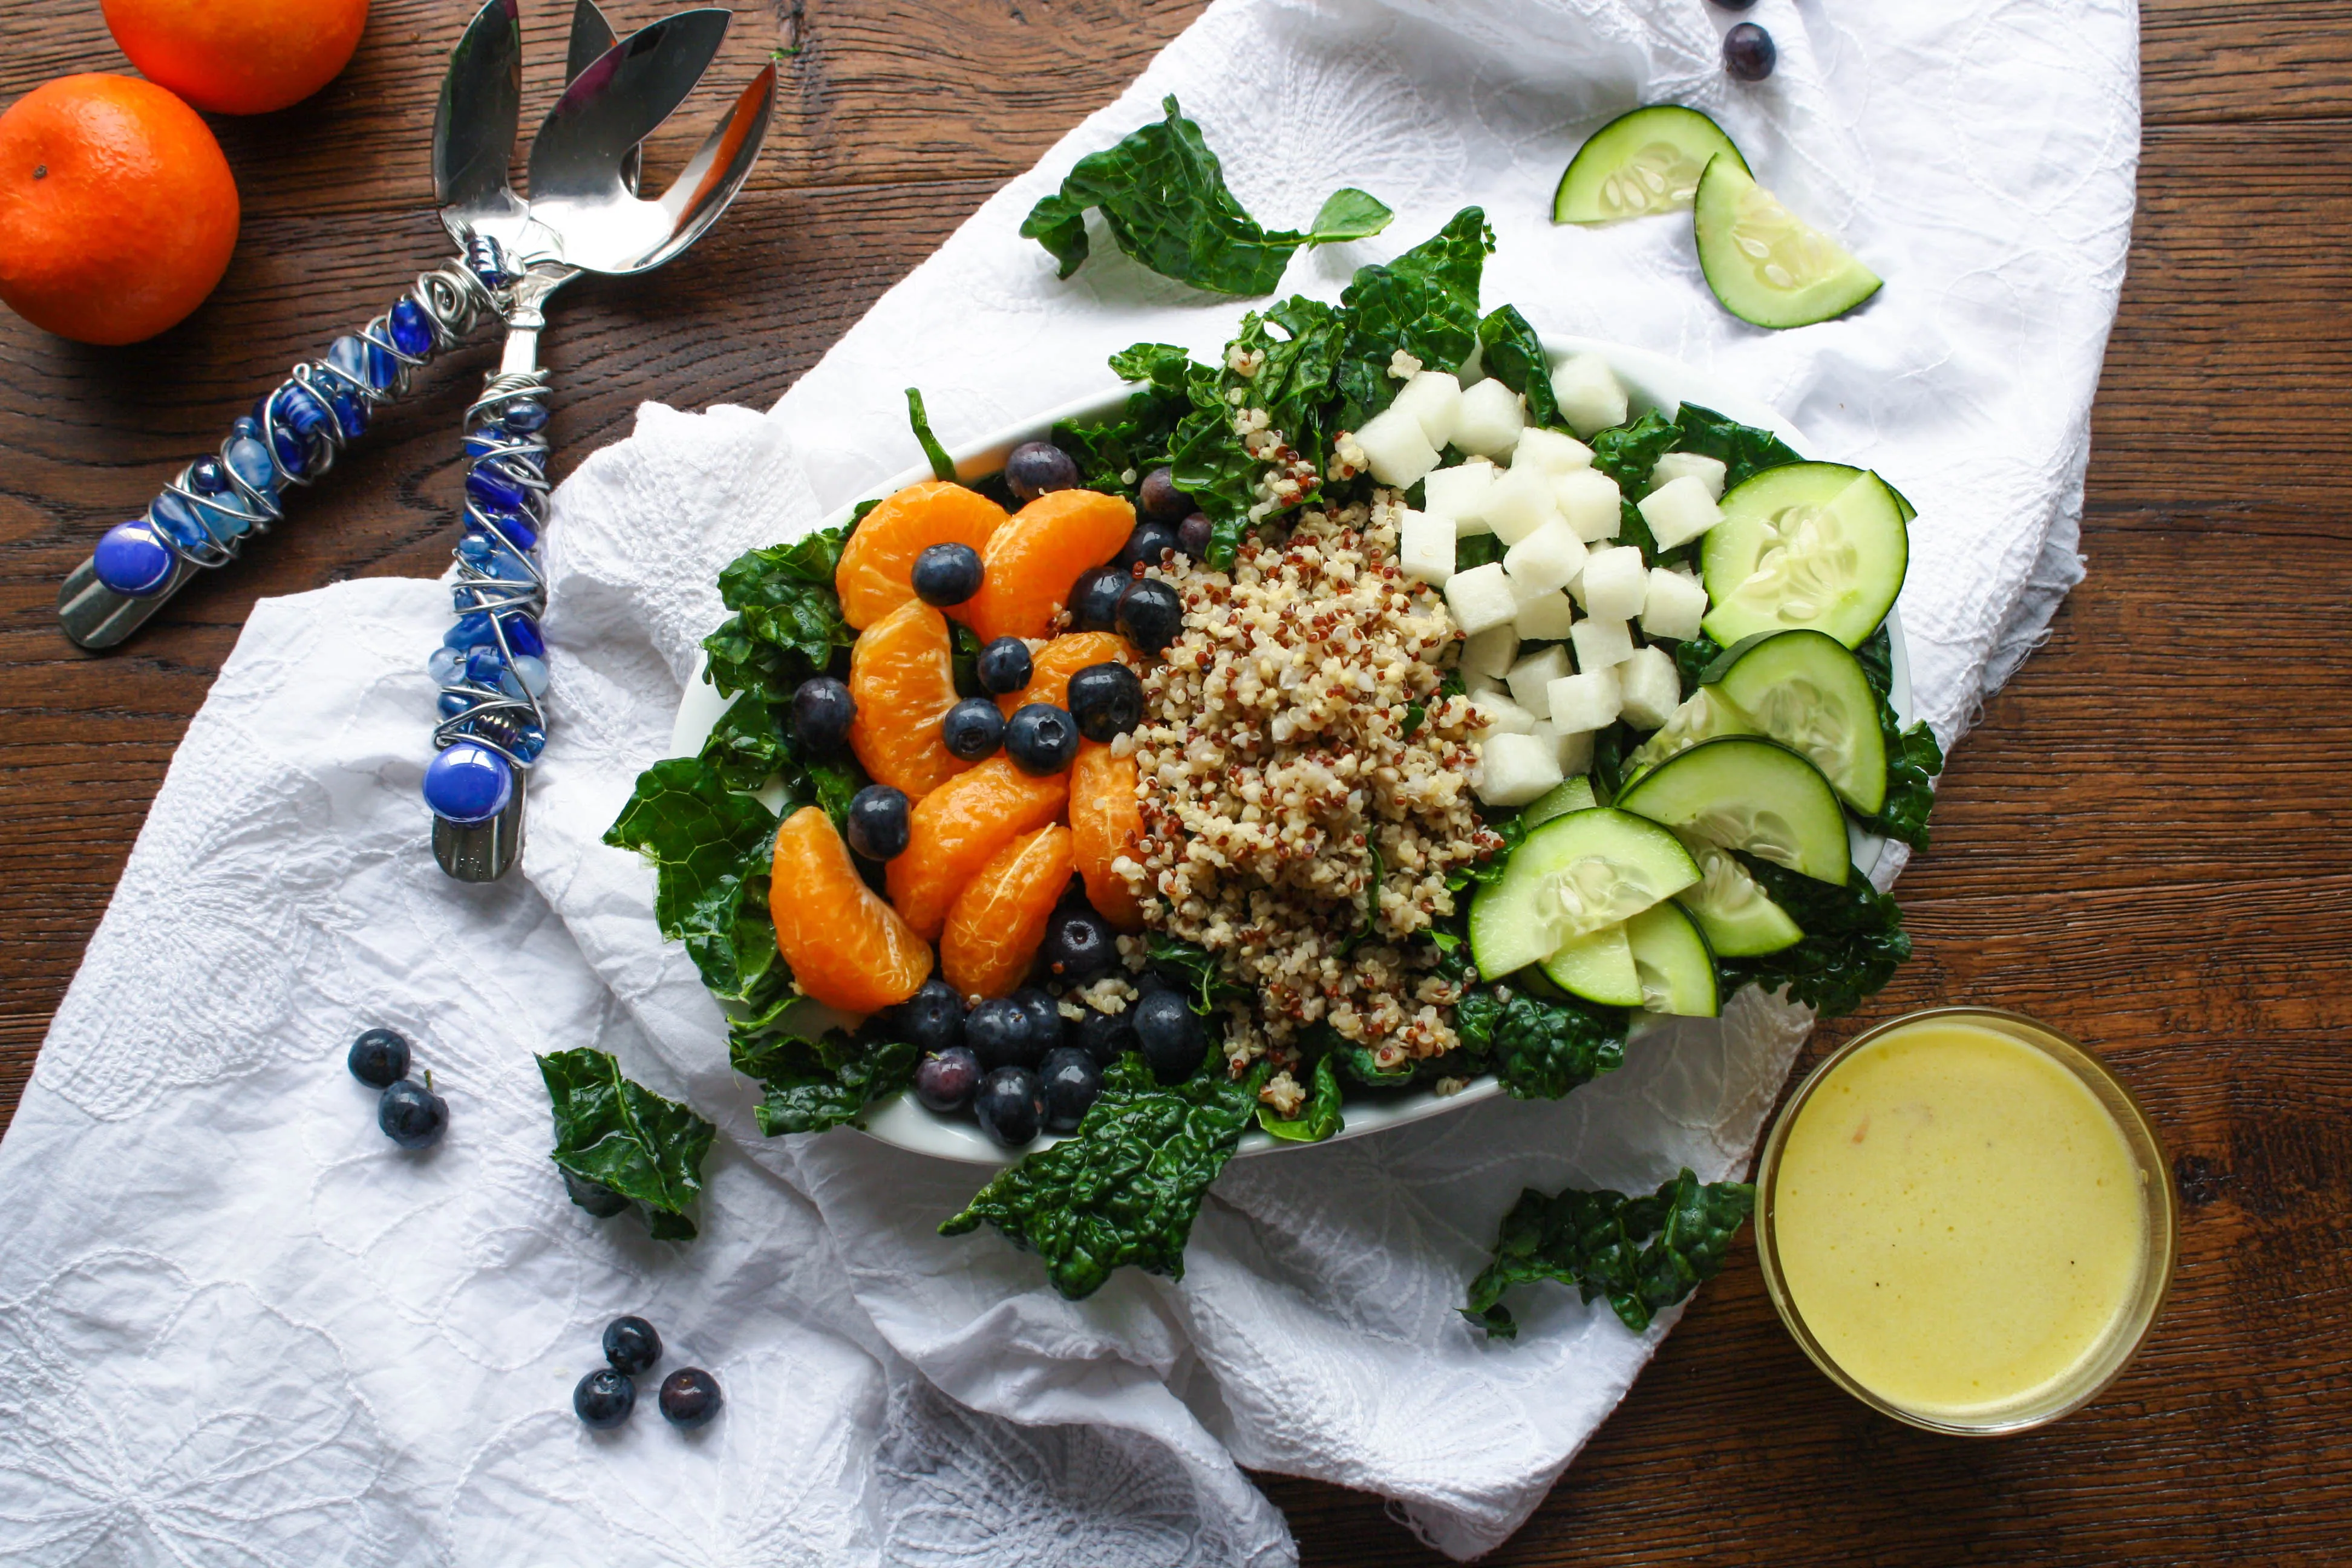 Kale-Quinoa Salad with Orange Vinaigrette is a fabulous salad! It's filled with good-for-you ingredients!